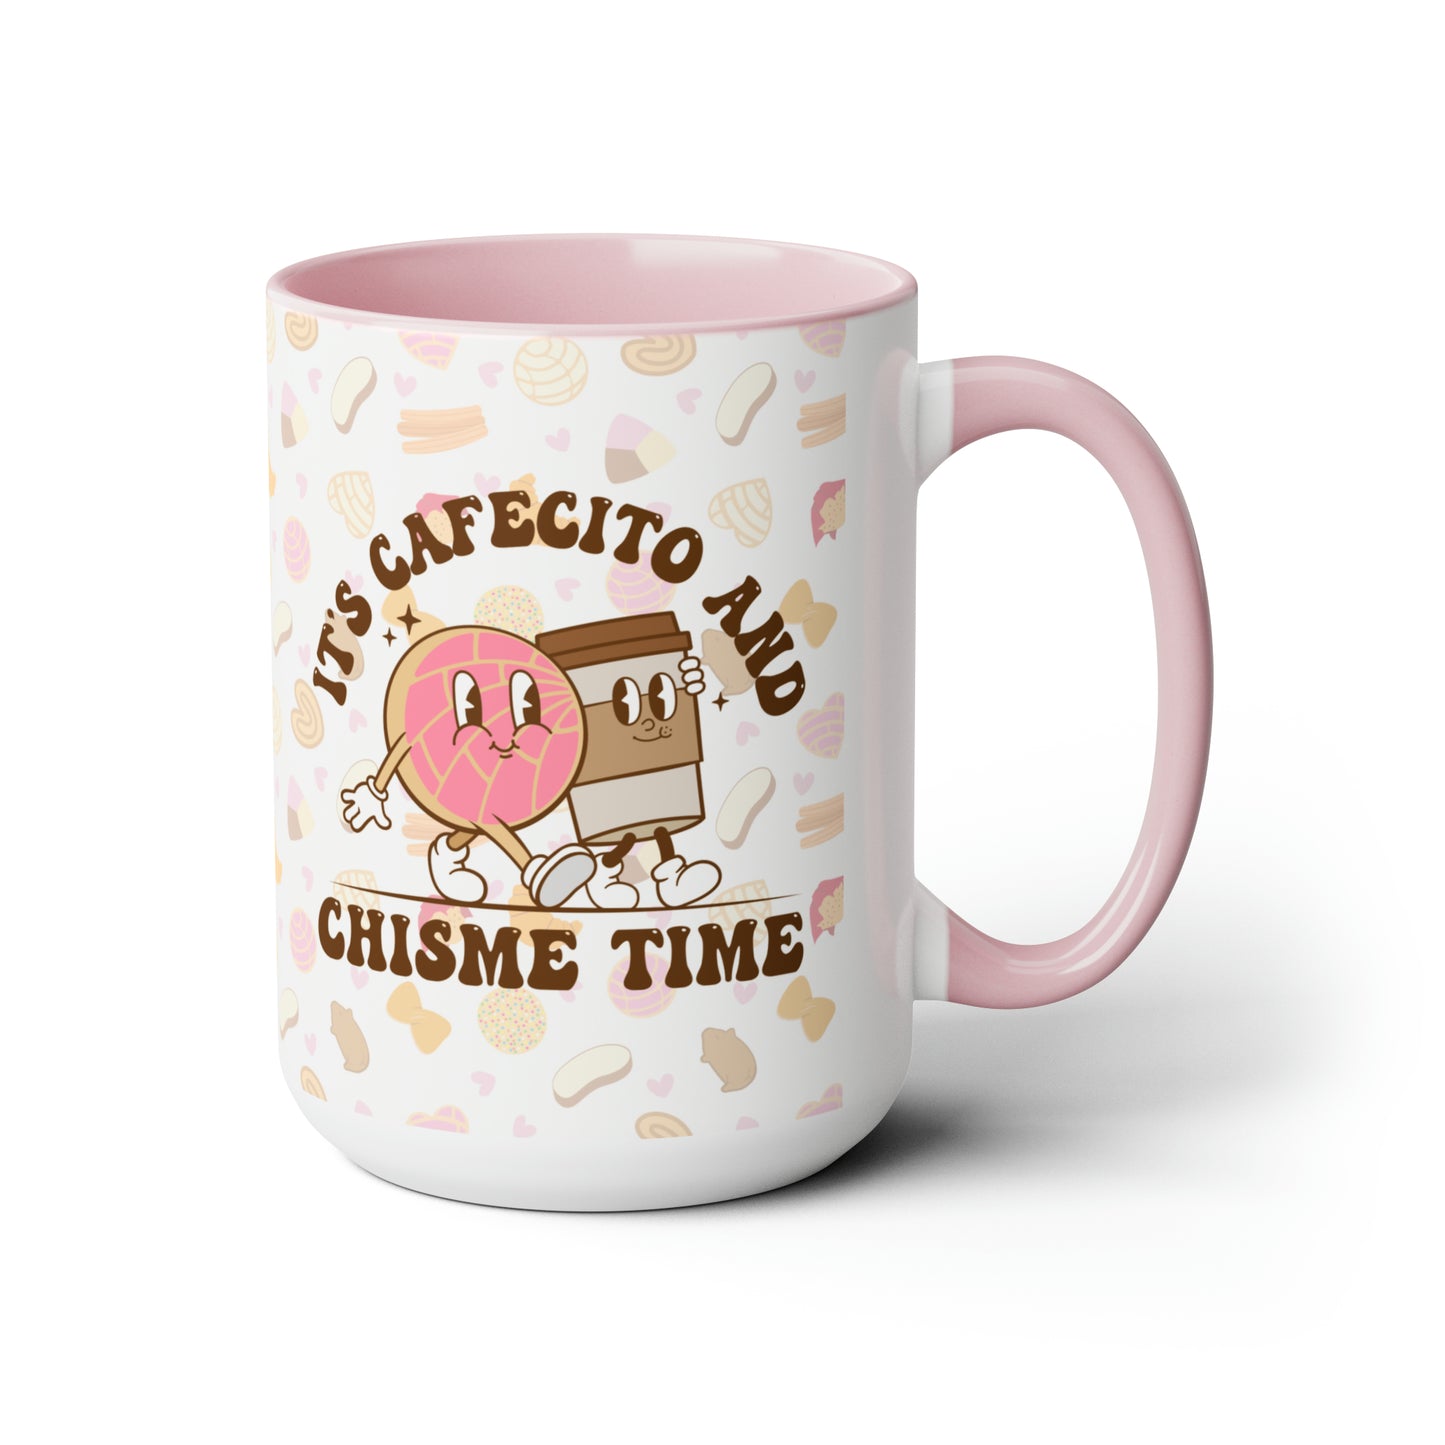 Cafecito and chisme time Coffee Mugs, 15oz for godmother, Mexican mom or Latin friend. Christmas gift for Mexican friends!!